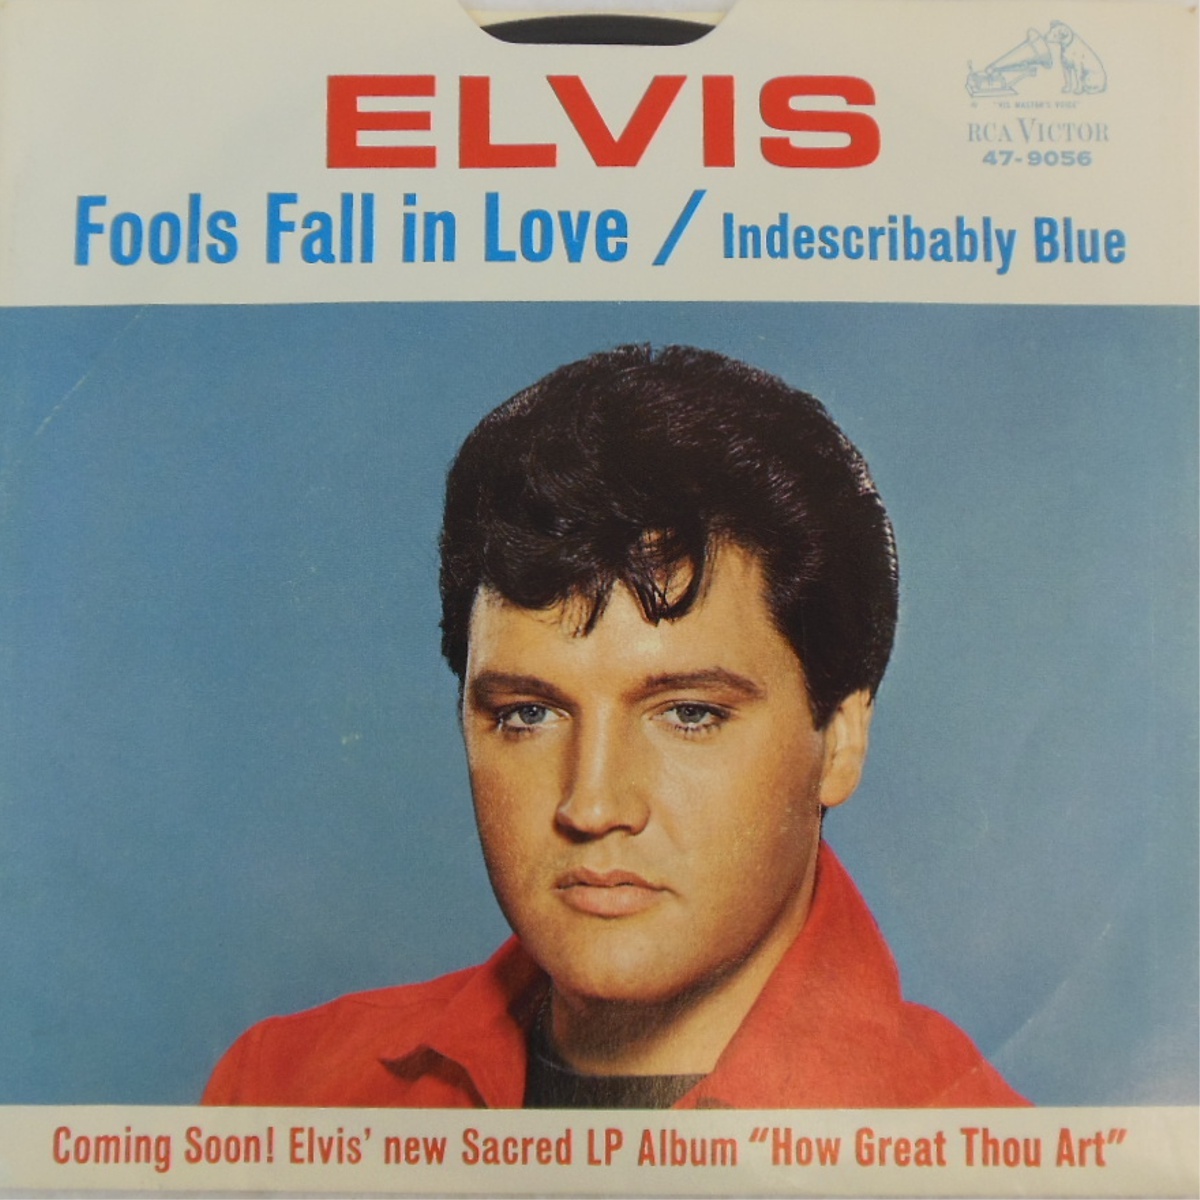 love - Indescribably Blue / Fools Fall In Love 47-9056ahxcuq